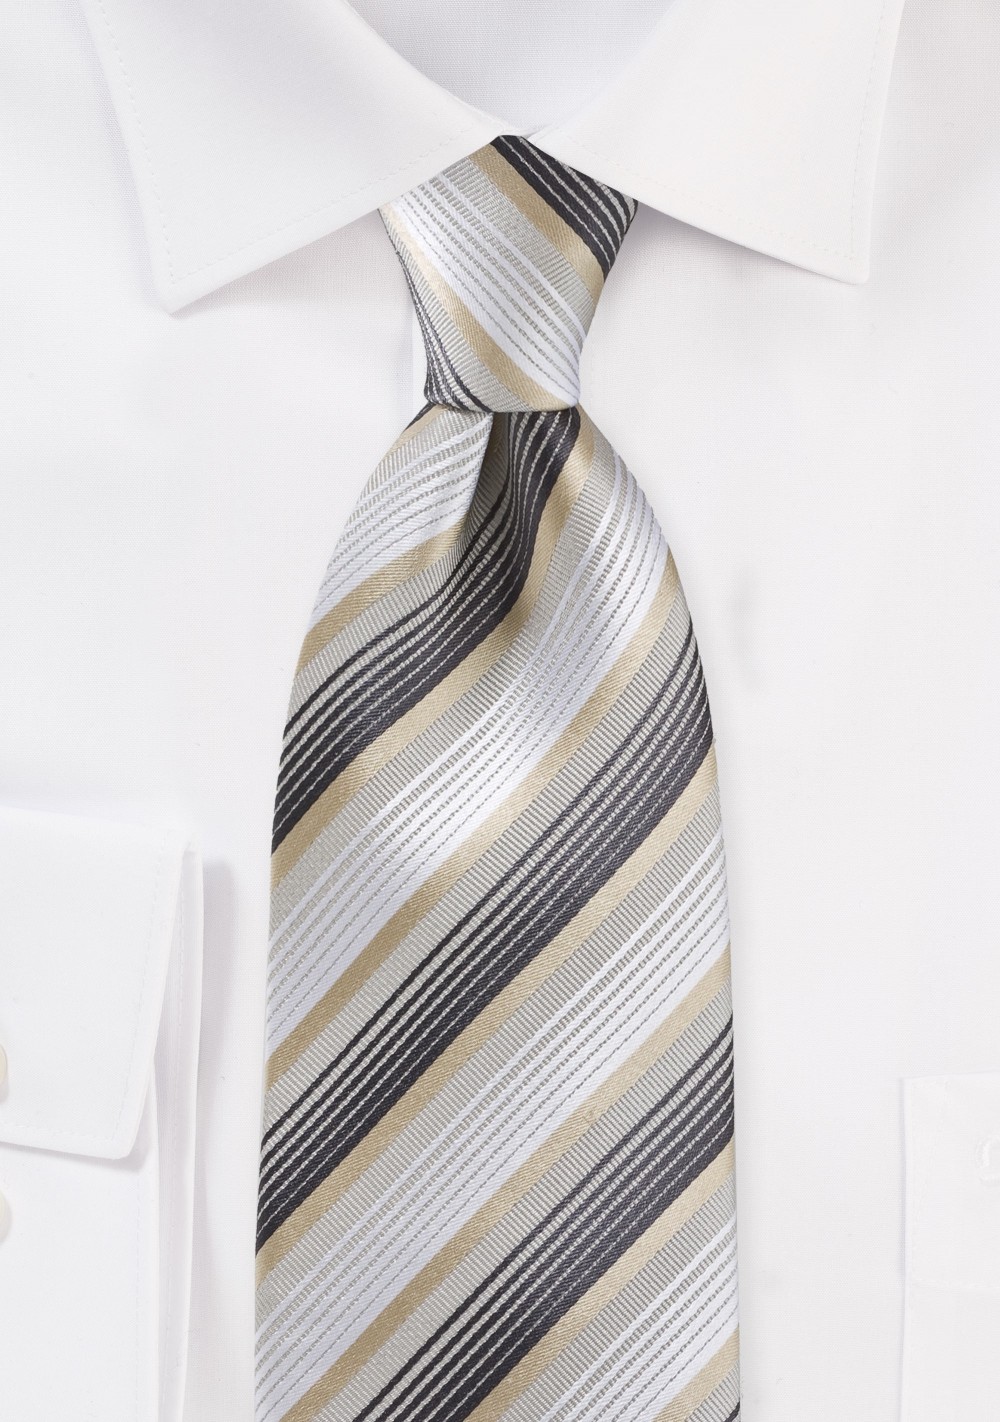 Striped Tie in Whites, Golds and Charcoals